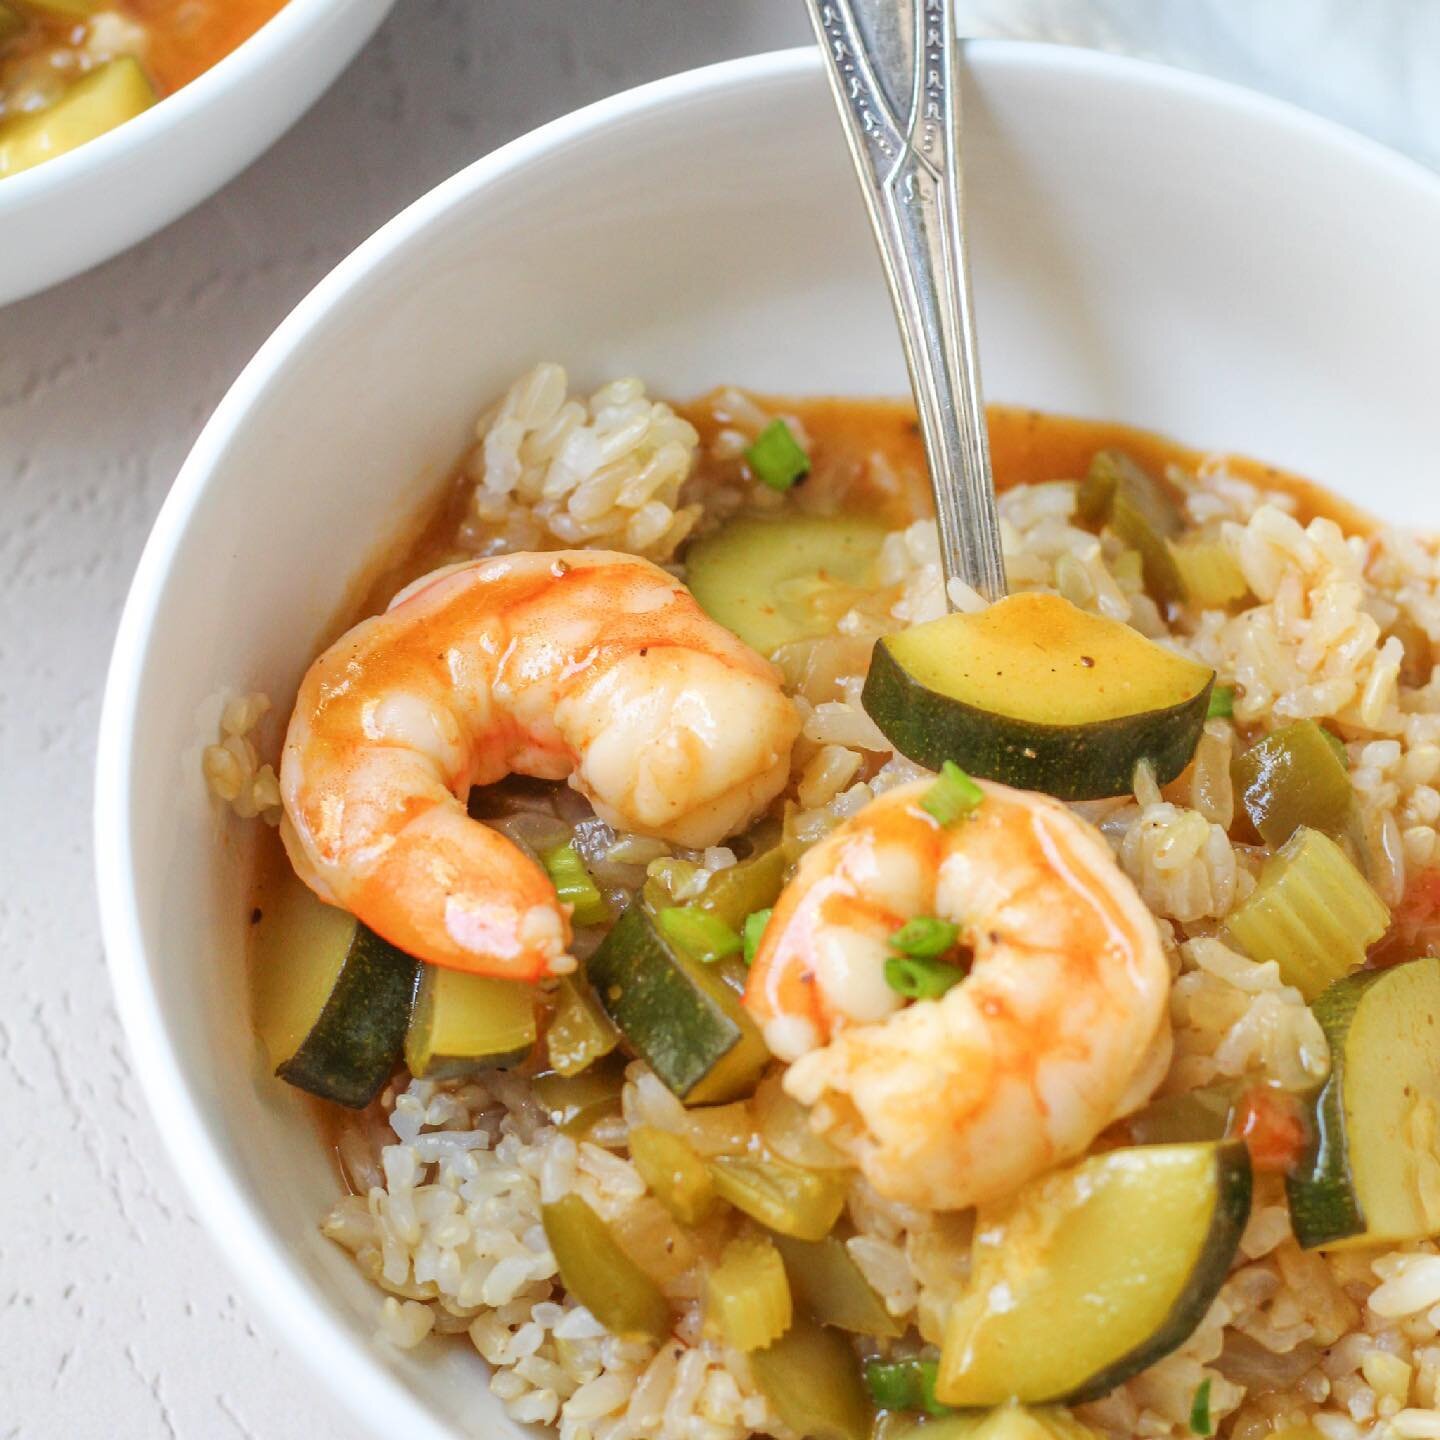 GF SHRIMP &Eacute;TOUFF&Eacute;E 

This is one of my all time favorite recipes, I like to make it once and eat it all week!

The secret to making this dish gluten free is the arrowroot powder! It helps thicken the sauce just as if flour would in a tr